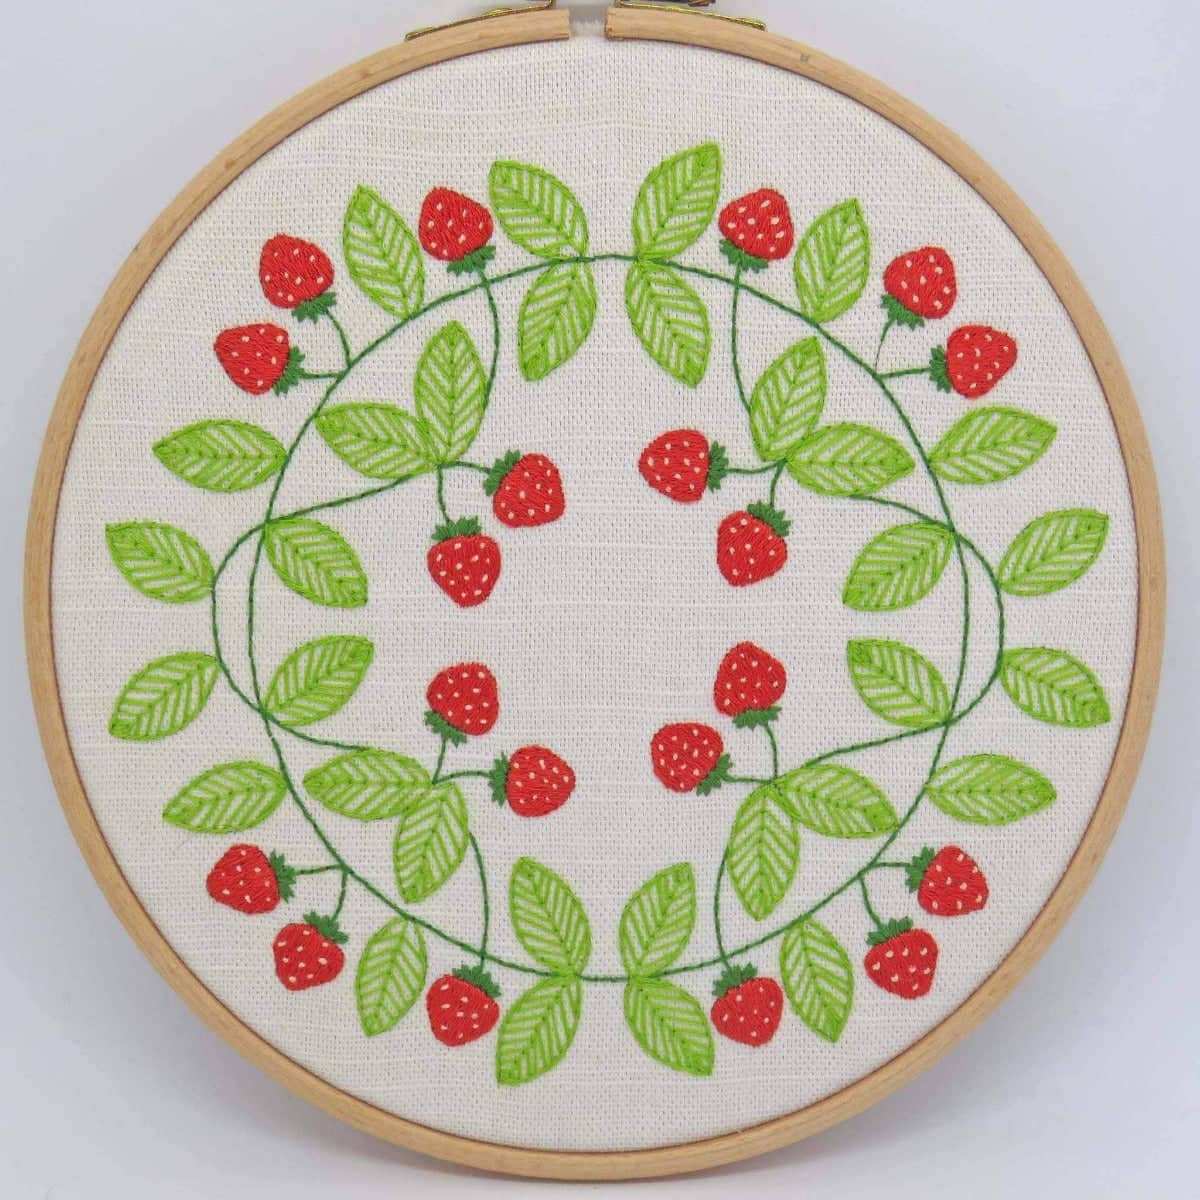 Strawberry Swirl, Hand Embroidery Pattern , PDF Download , StitchDoodles , embroidery hoop kit, embroidery kit for adults, embroidery kit for beginners, embroidery kits for adults, embroidery kits for beginers, hand embroidery, modern embroidery kits, PDF pattern , StitchDoodles , shop.stitchdoodles.com